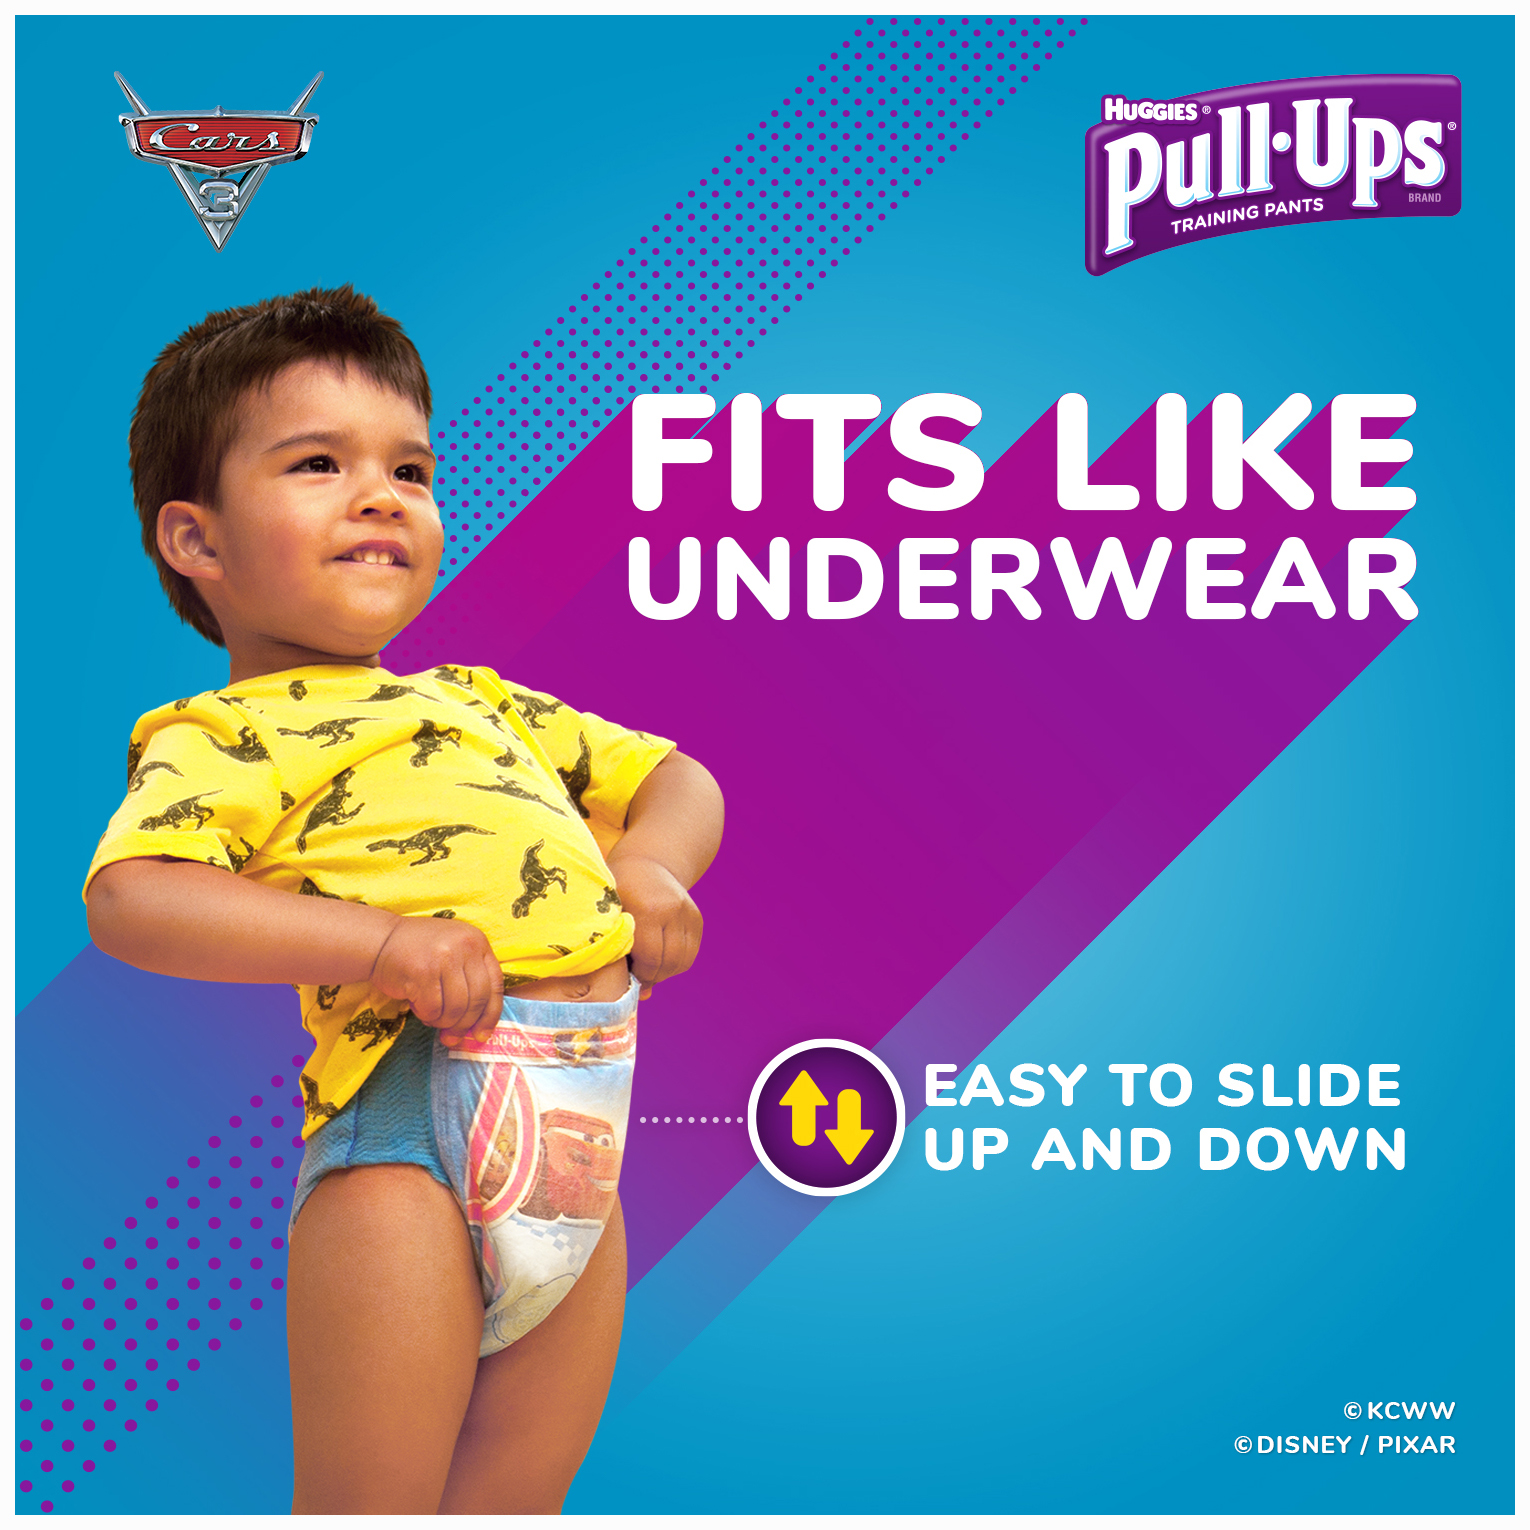 Pull-Ups Boys' Learning Designs Training Pants, Size 3T-4T, 48 Count - image 4 of 8